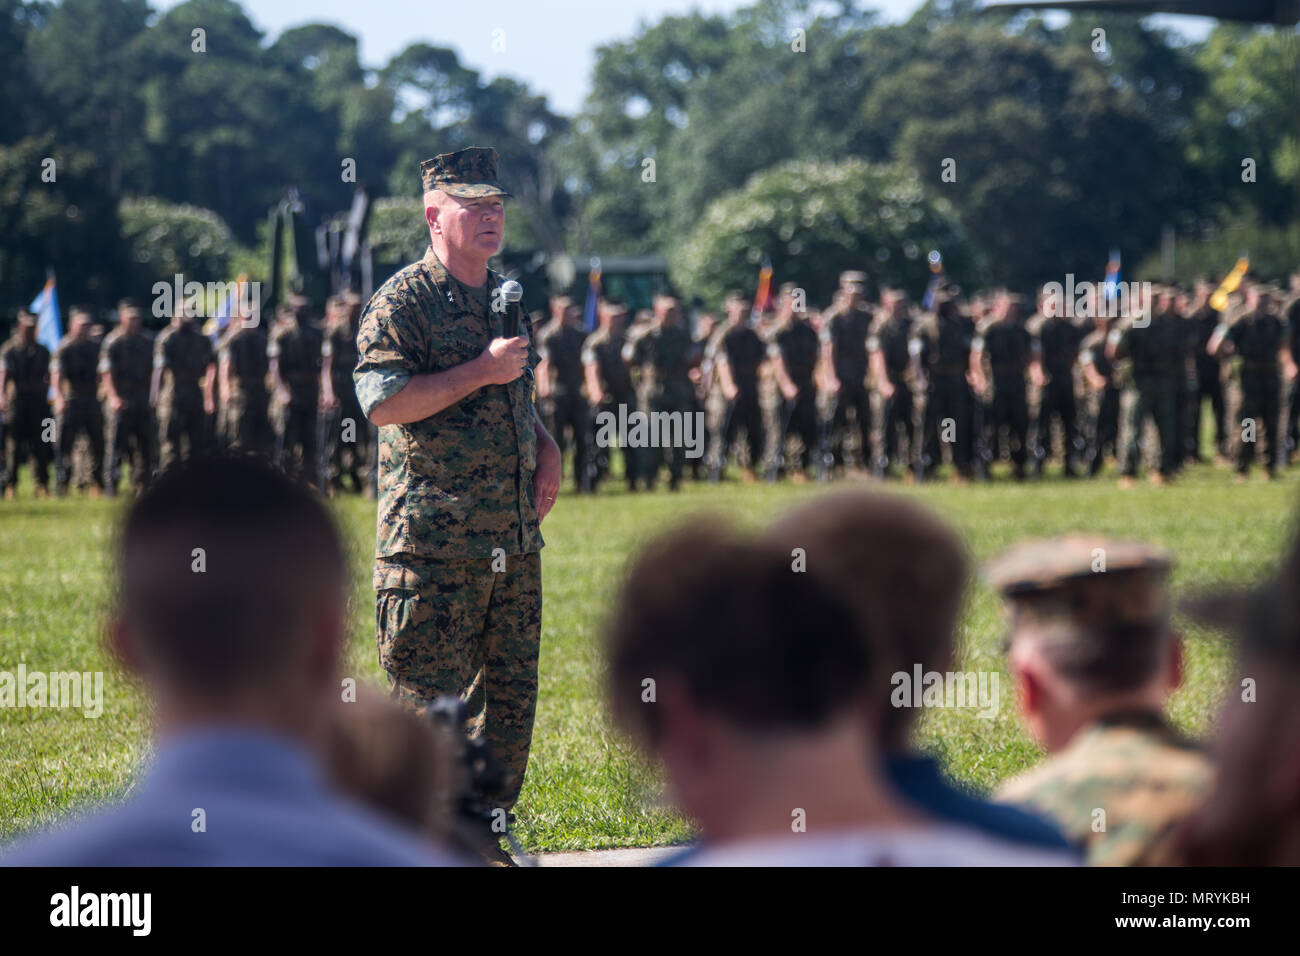 U.S. Marine Corps Maj Gen. Walter L. Miller, Jr., speaks to the audience during the II Marine Expeditionary Force (II MEF) change of command ceremony on Camp Lejeune, N.C., July 14, 2017. During the ceremony, Miller relinquished his post as commanding general of II MEF to Lt. Gen. Robert F. Hedelund. (U.S. Marine Corps photo by Lance Cpl. Zachary M. Ford) Stock Photo